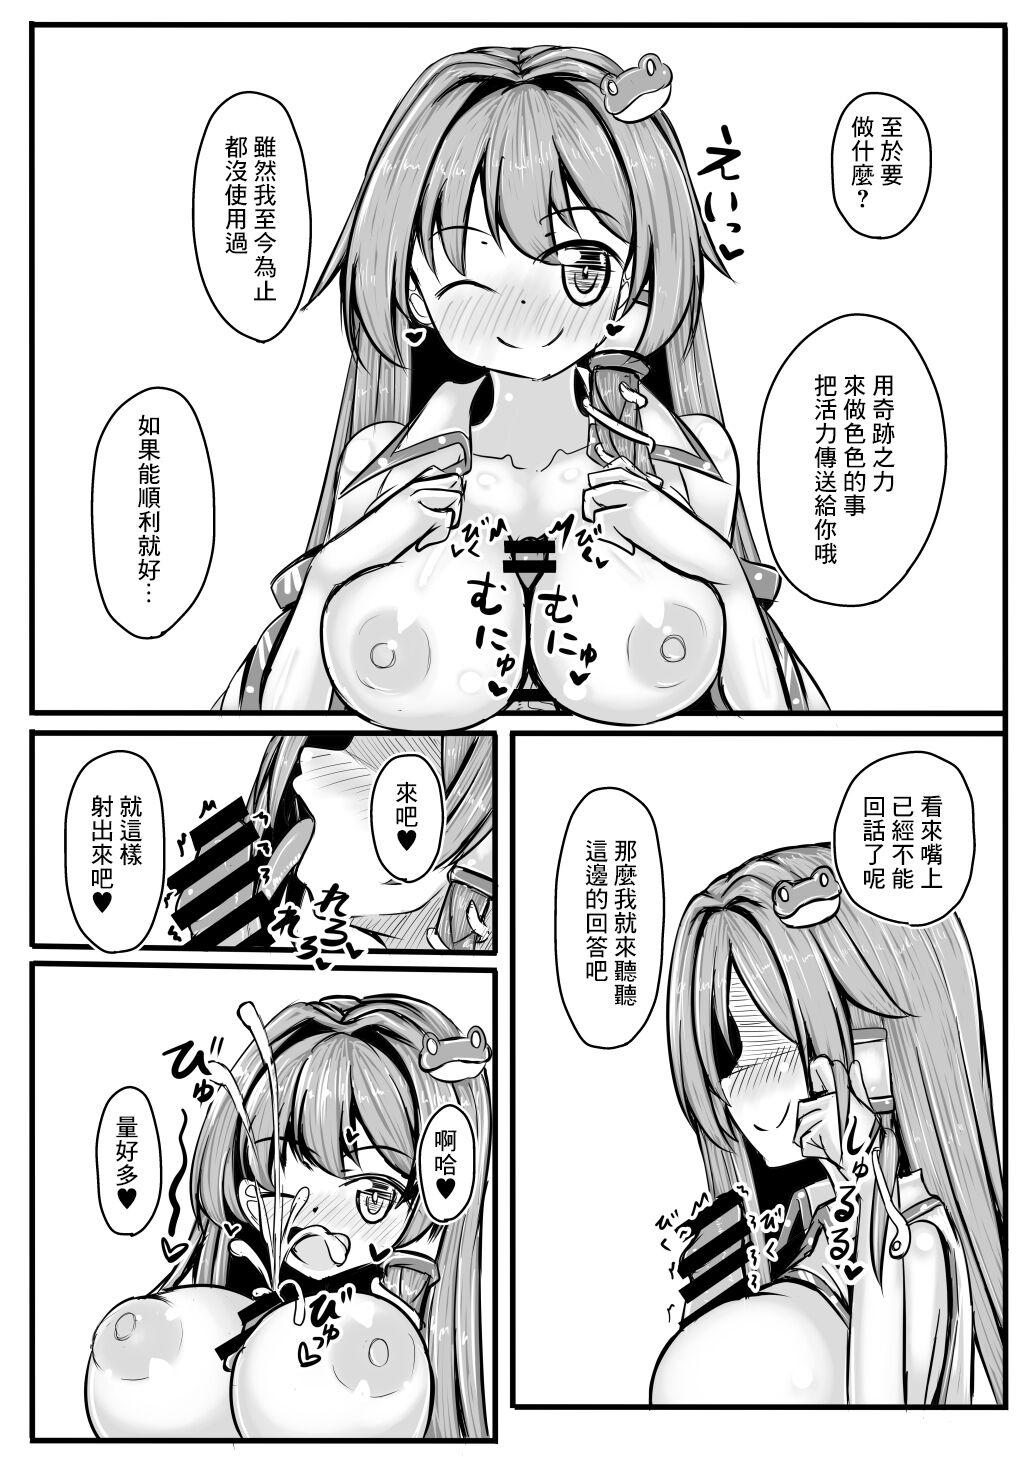 Asslick 早苗さんと元気になるえっちするコピ本 - Touhou project Petite Girl Porn - Page 2